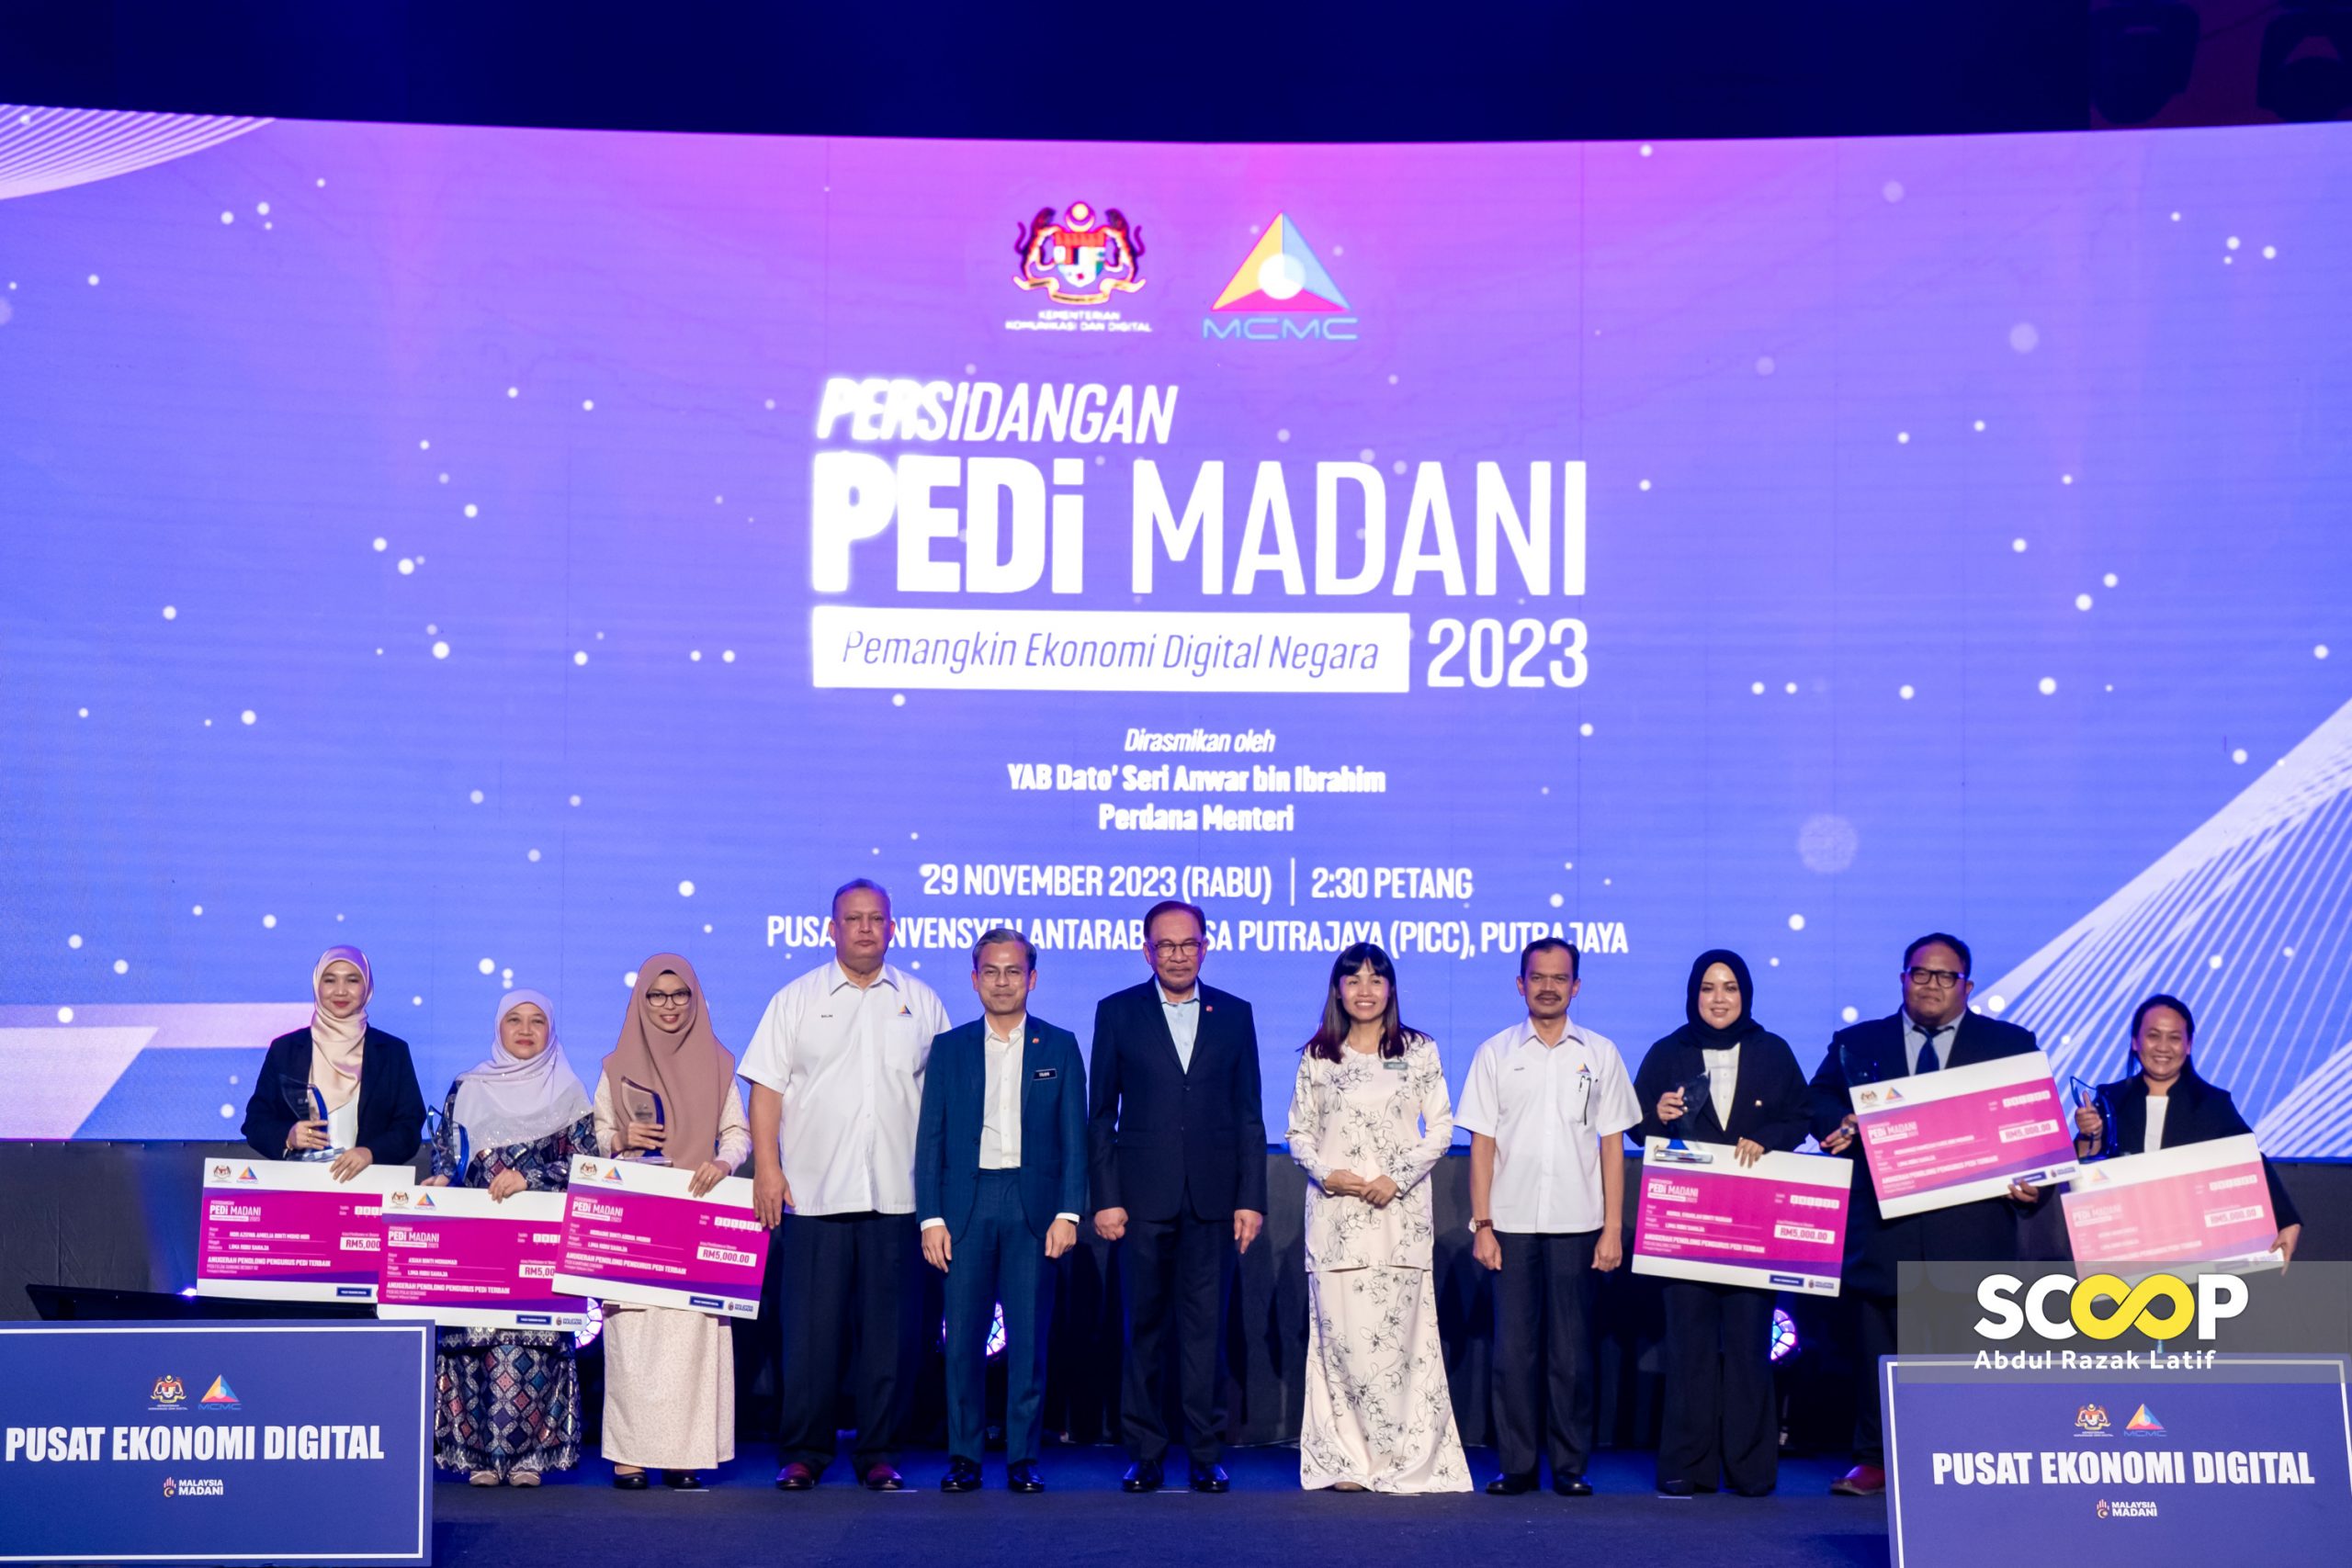 PEDi Madani Conference 2023: an unveiling of tech marvels, digital triumphs for Malaysia's future